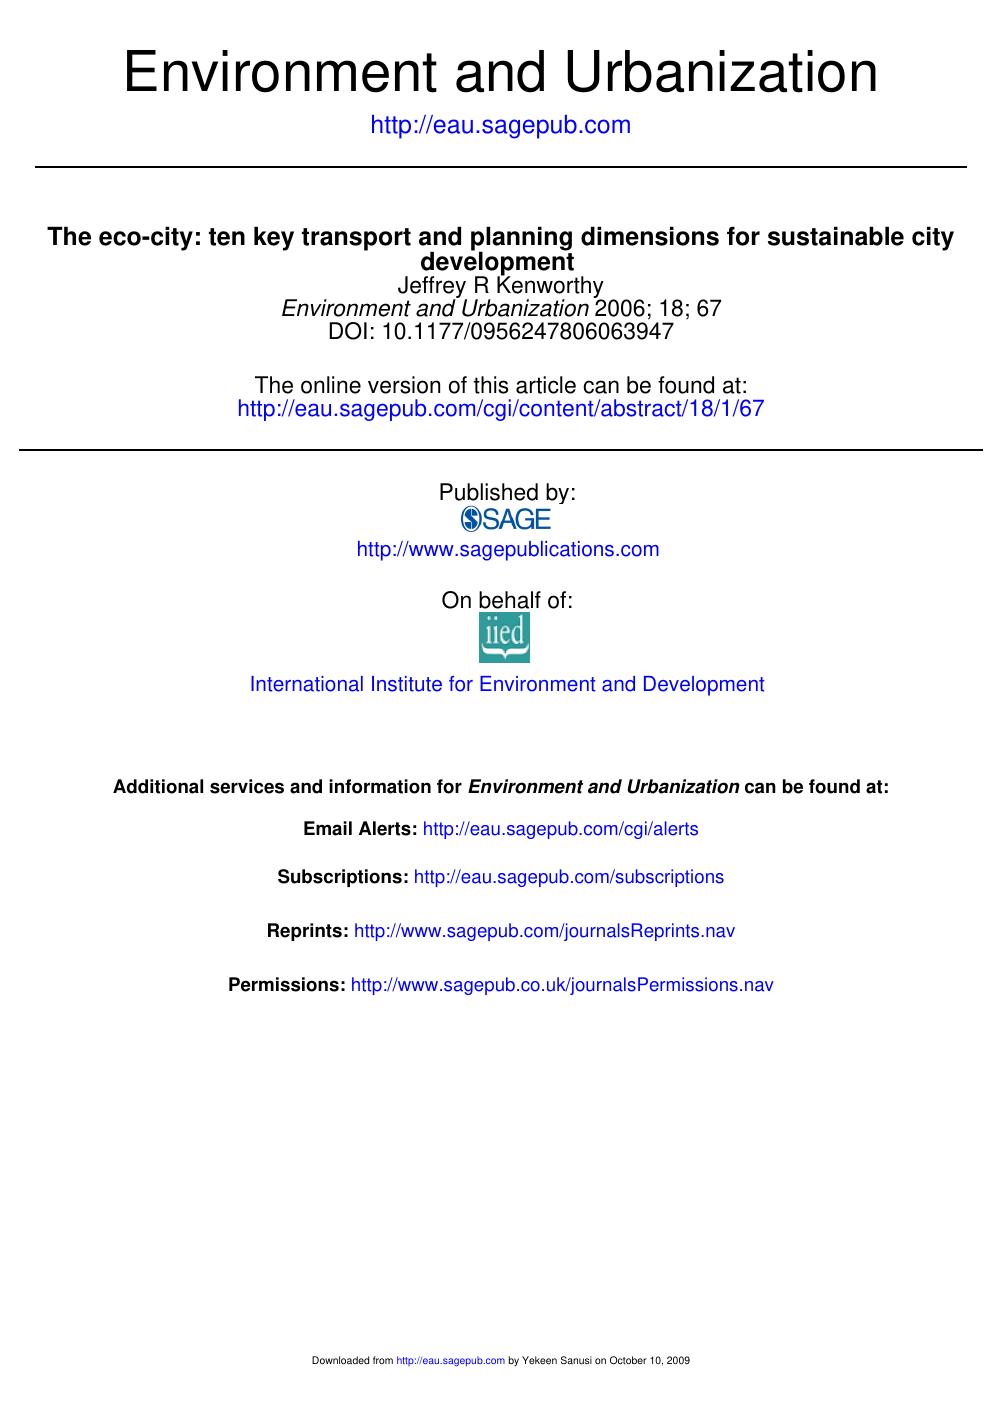 The eco-city ten key transport and planning dimensions for sustainable city, 2006